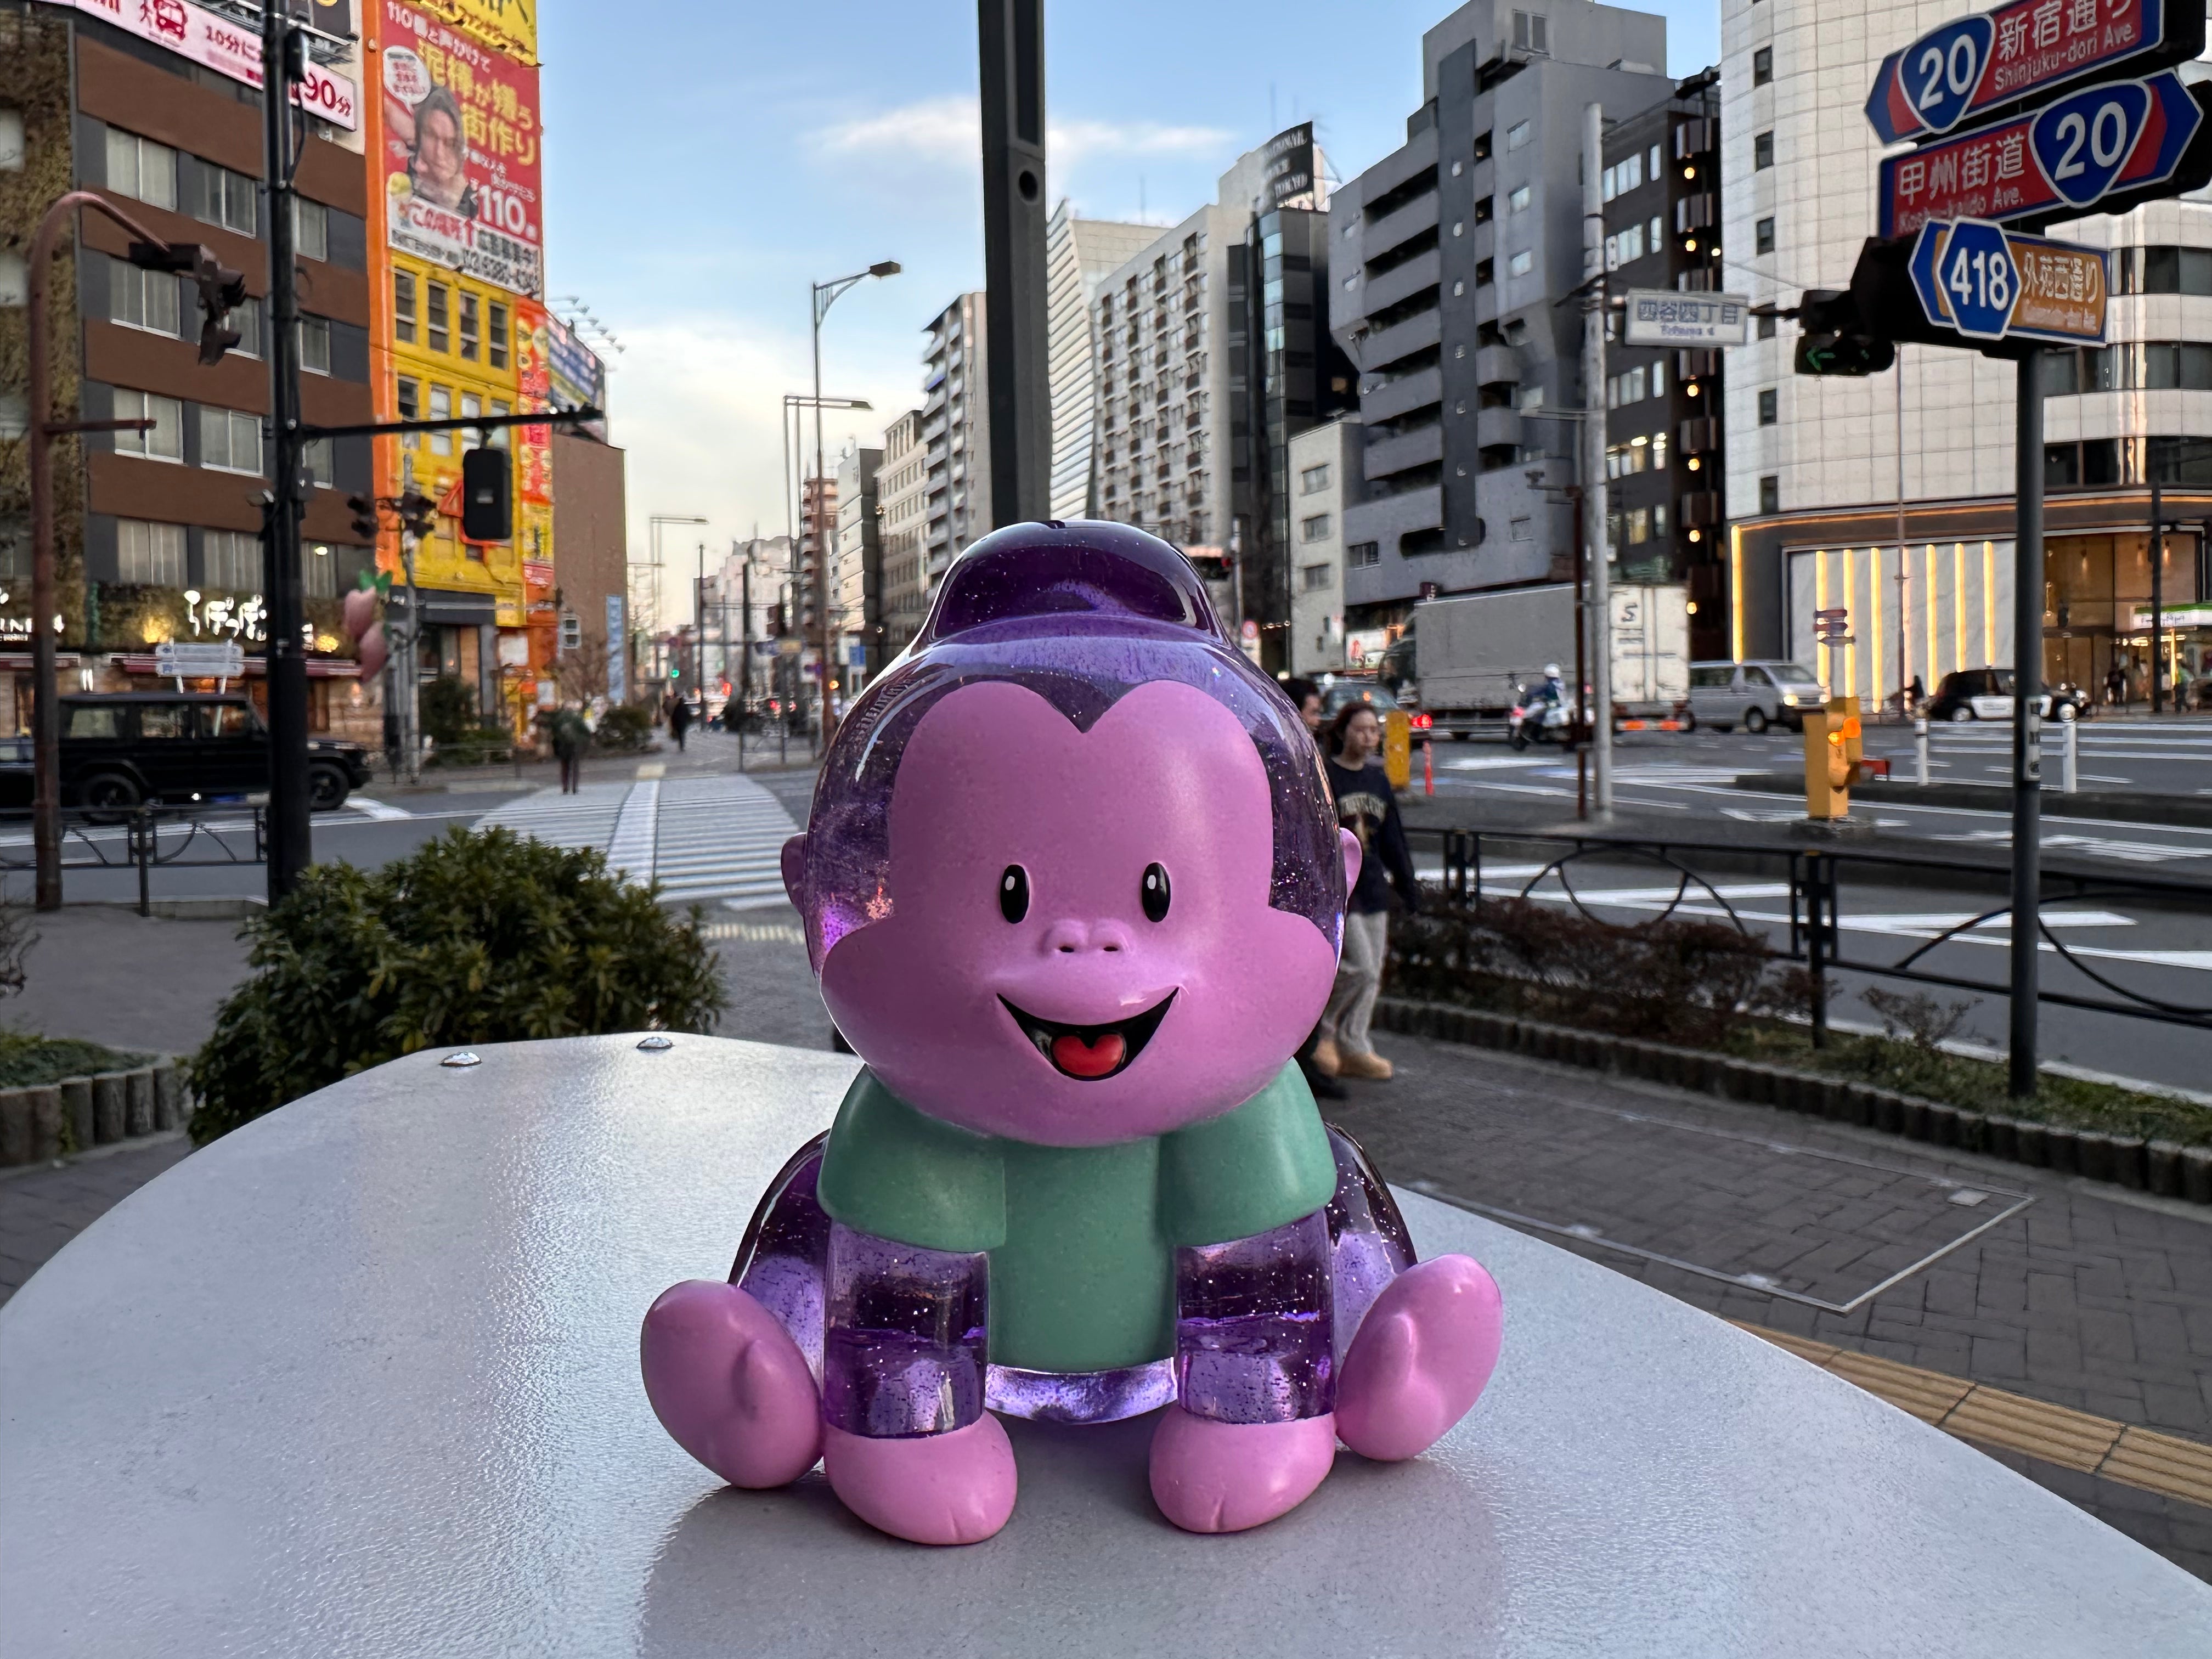 Arlo by Prime toy monkey figurine, 5 inches tall, made of high grade resin, limited to 50pcs, sitting on a table in a city street.